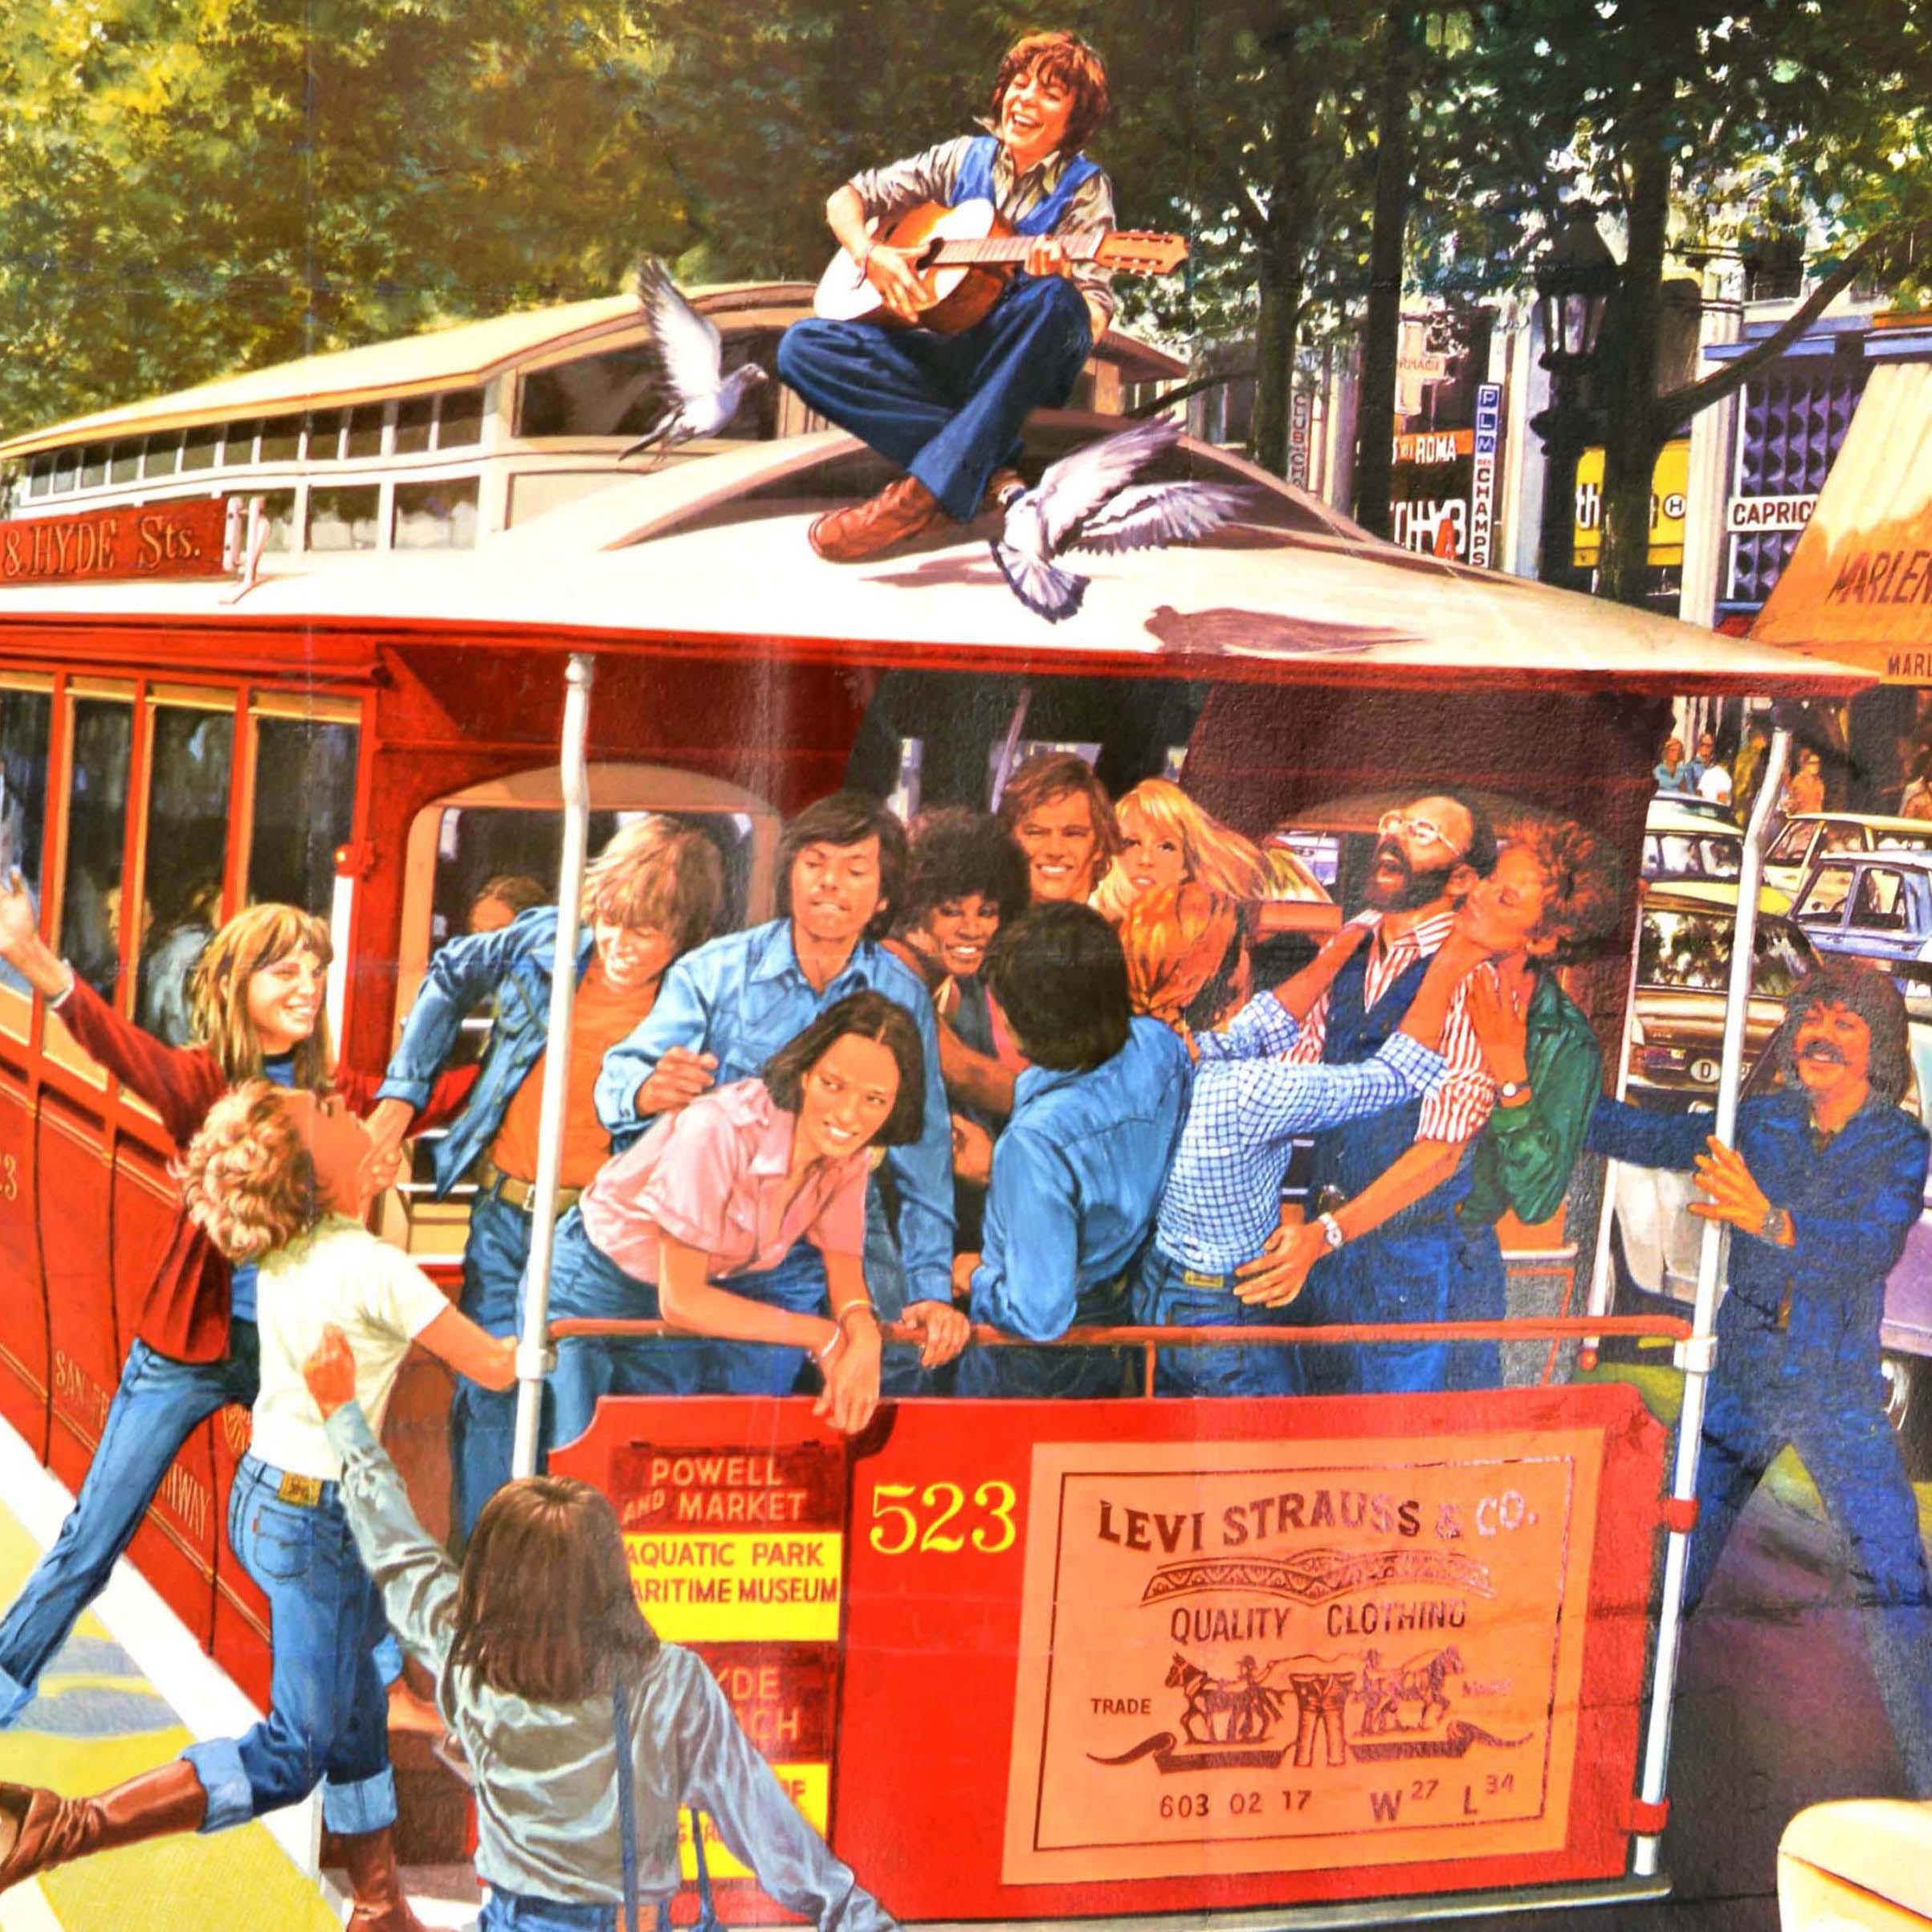 Original vintage fashion advertising poster for Levi's jeans featuring a colourful illustration of people wearing blue jeans, denim jackets and shirts on board and running towards an iconic San Francisco cable car tram in California marked 523